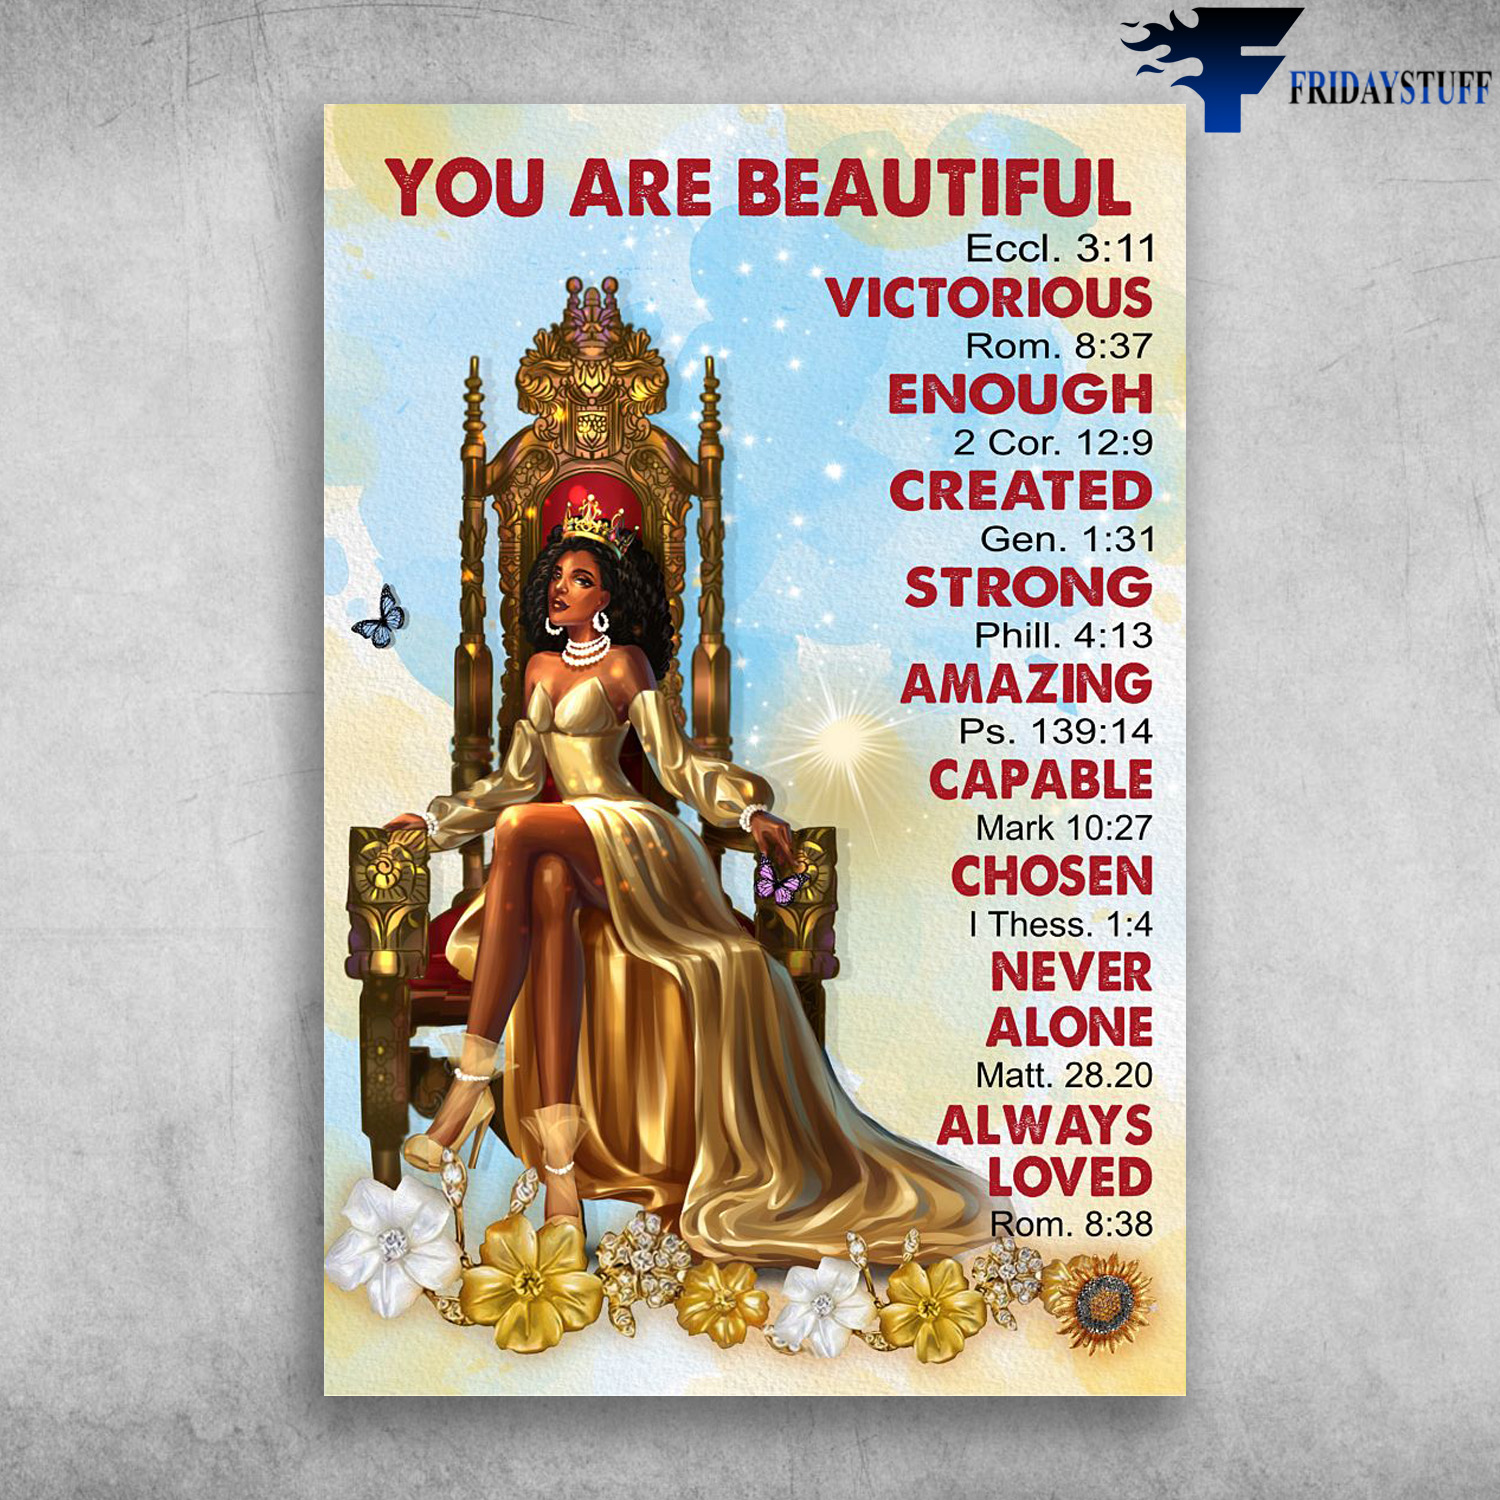 Black Queen - You Are Beautiful Victorious, Enough, Created, Strong, Amazing, Capable, Chosen, Never Alone, Always Loved, Butterfly, Sunflower, gift for mother's Day